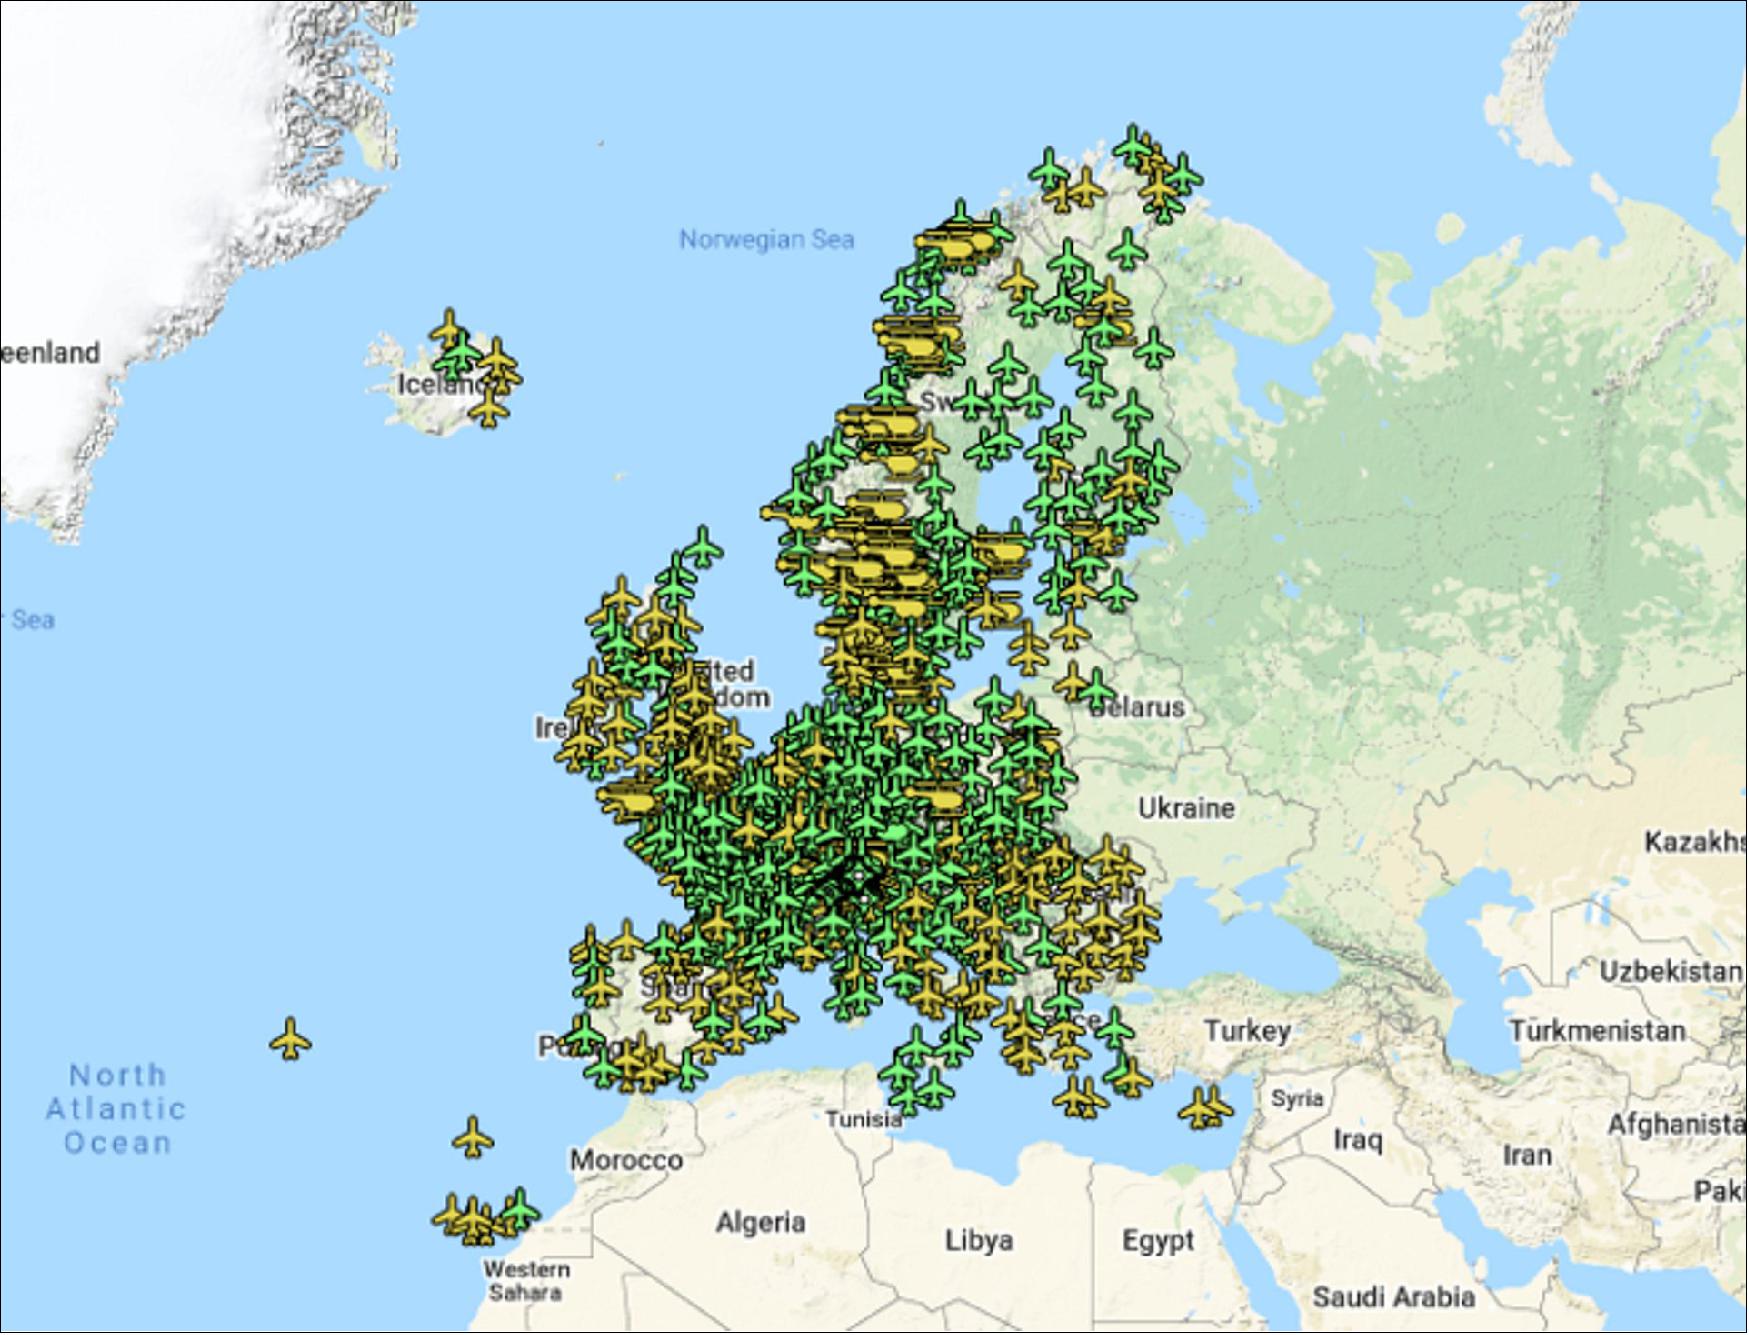 Figure 25: More than 385 airports and helipads and 60 airlines across Europe are as of March 2021 utilizing EGNOS-based LPV-200 approaches, short for ‘Localizer Performance with Vertical guidance – 200 ft (60 m)’. The freely-available EGNOS service requires no ground equipment whatsoever, replacing the radio guidance beamed upward by traditional CAT I Instrument Landing System (ILS) infrastructure with no decrease in performance (image credit: GSA)